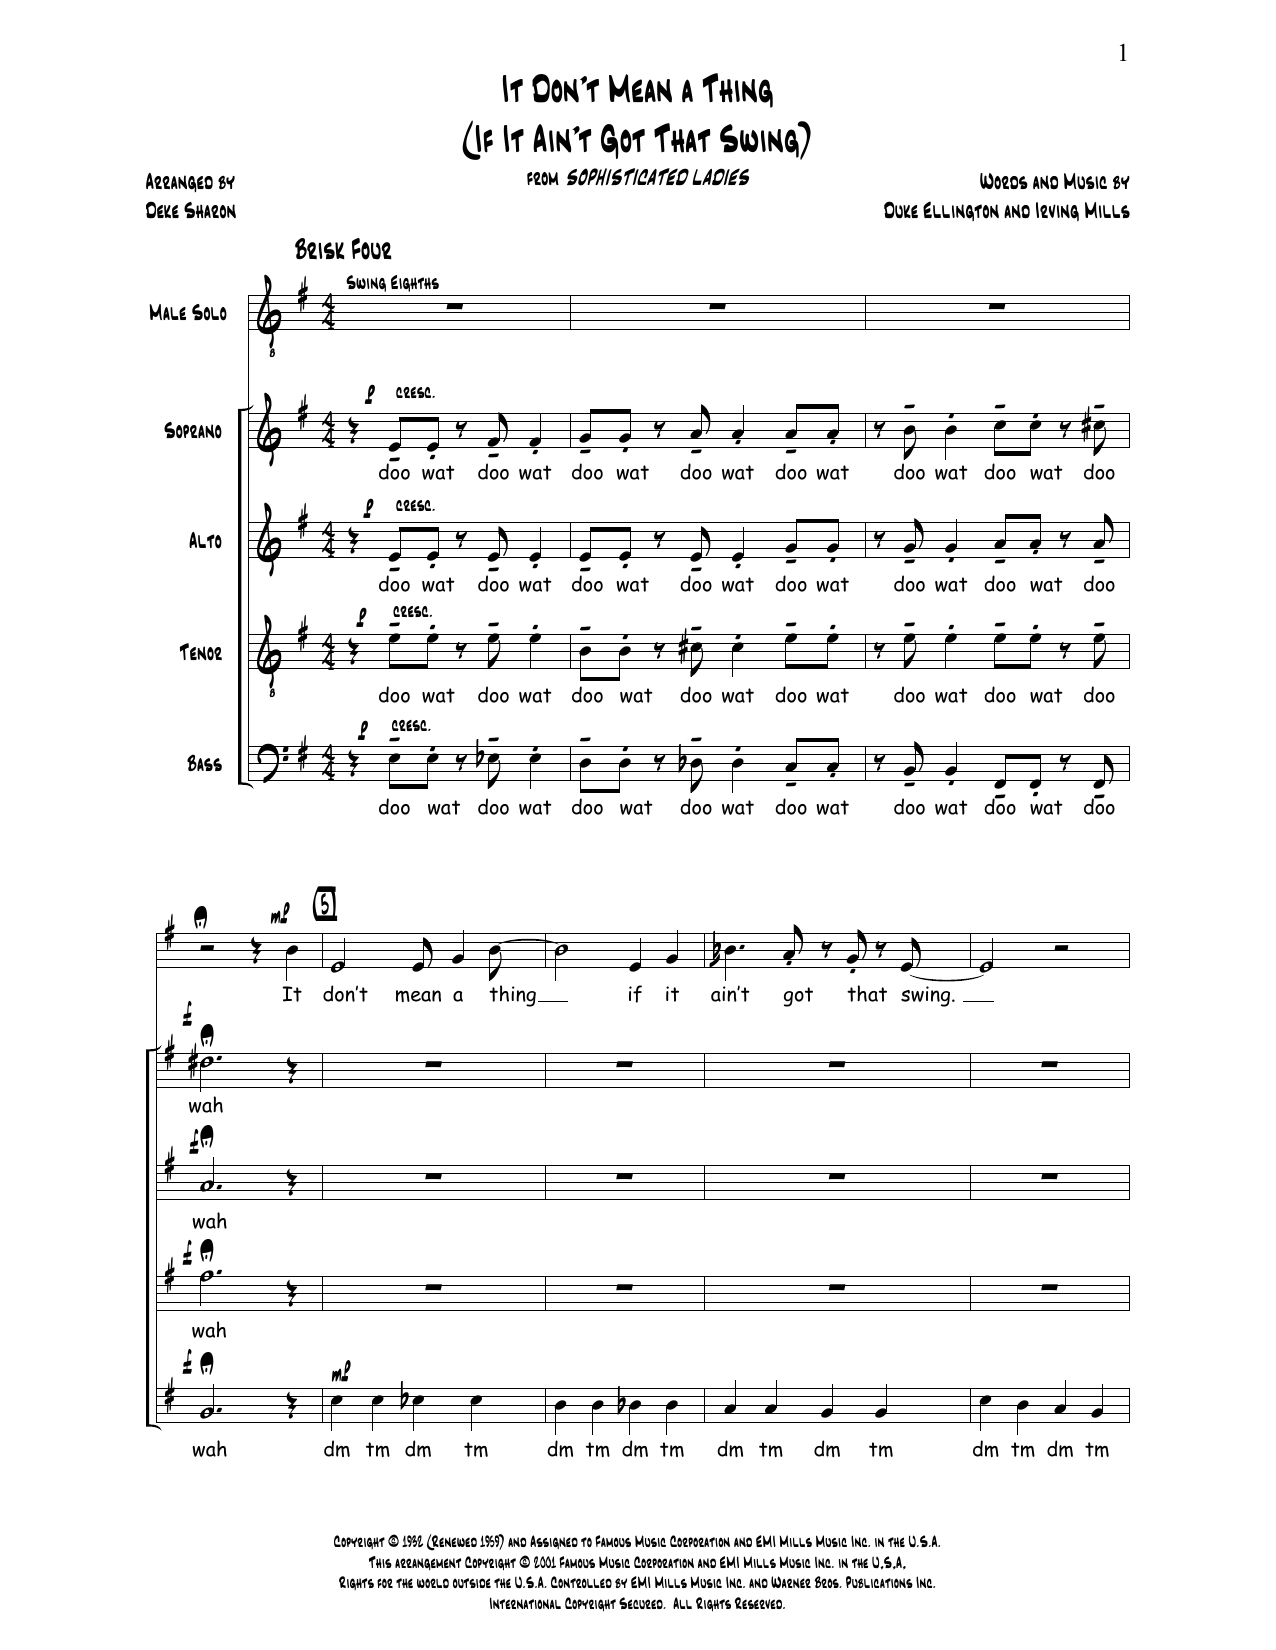 Deke Sharon It Don't Mean a Thing sheet music notes and chords. Download Printable PDF.